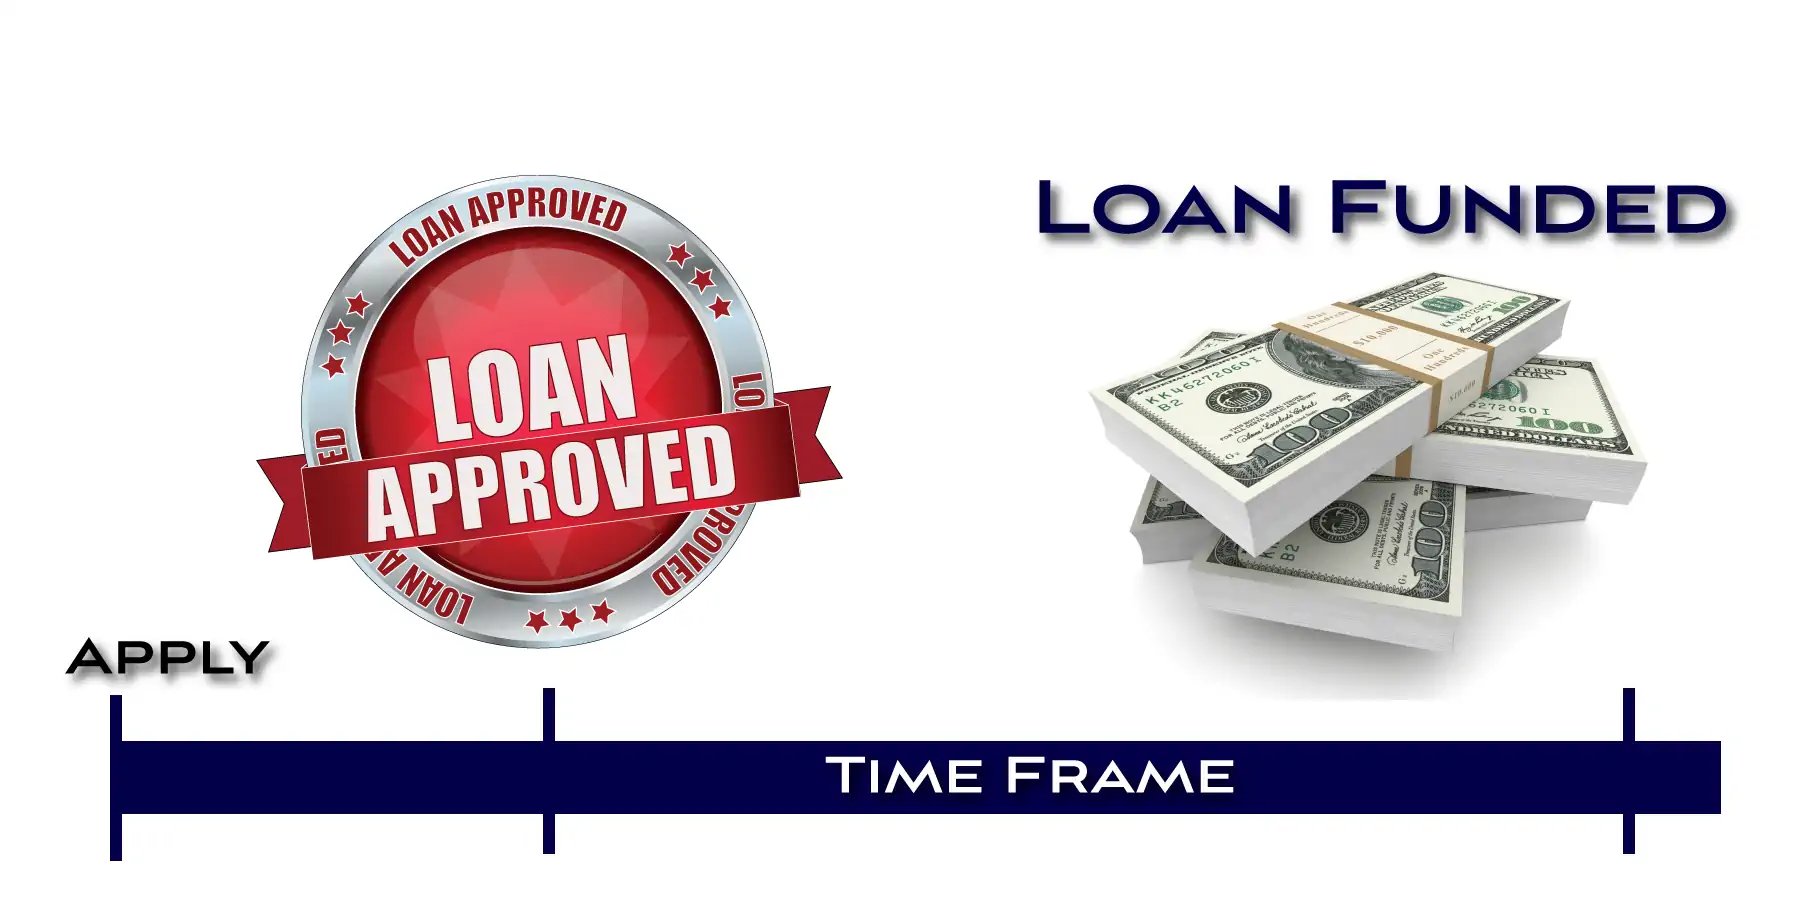 Direct Deposit Title loan Funding Time frame chart - Apply - Loan Approved - Loan Funded.